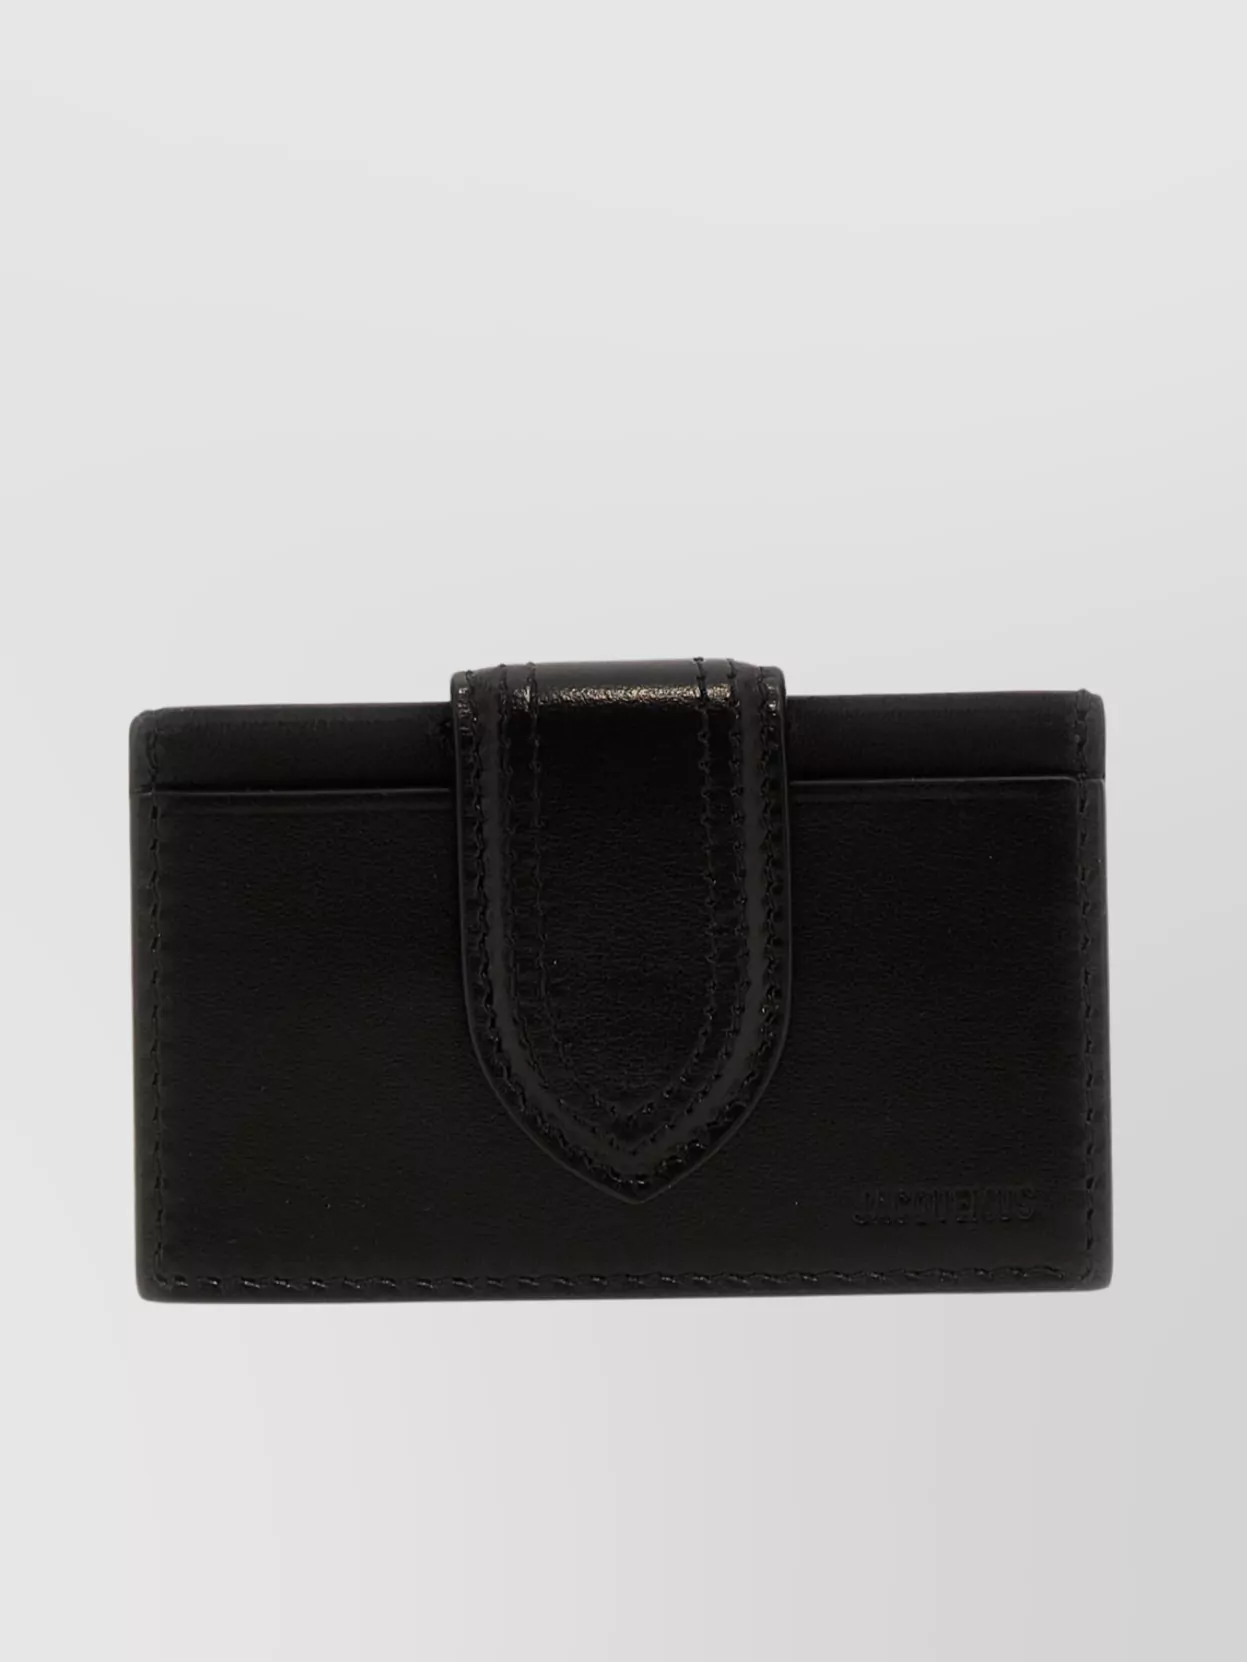 Jacquemus "small Child" Card Holder